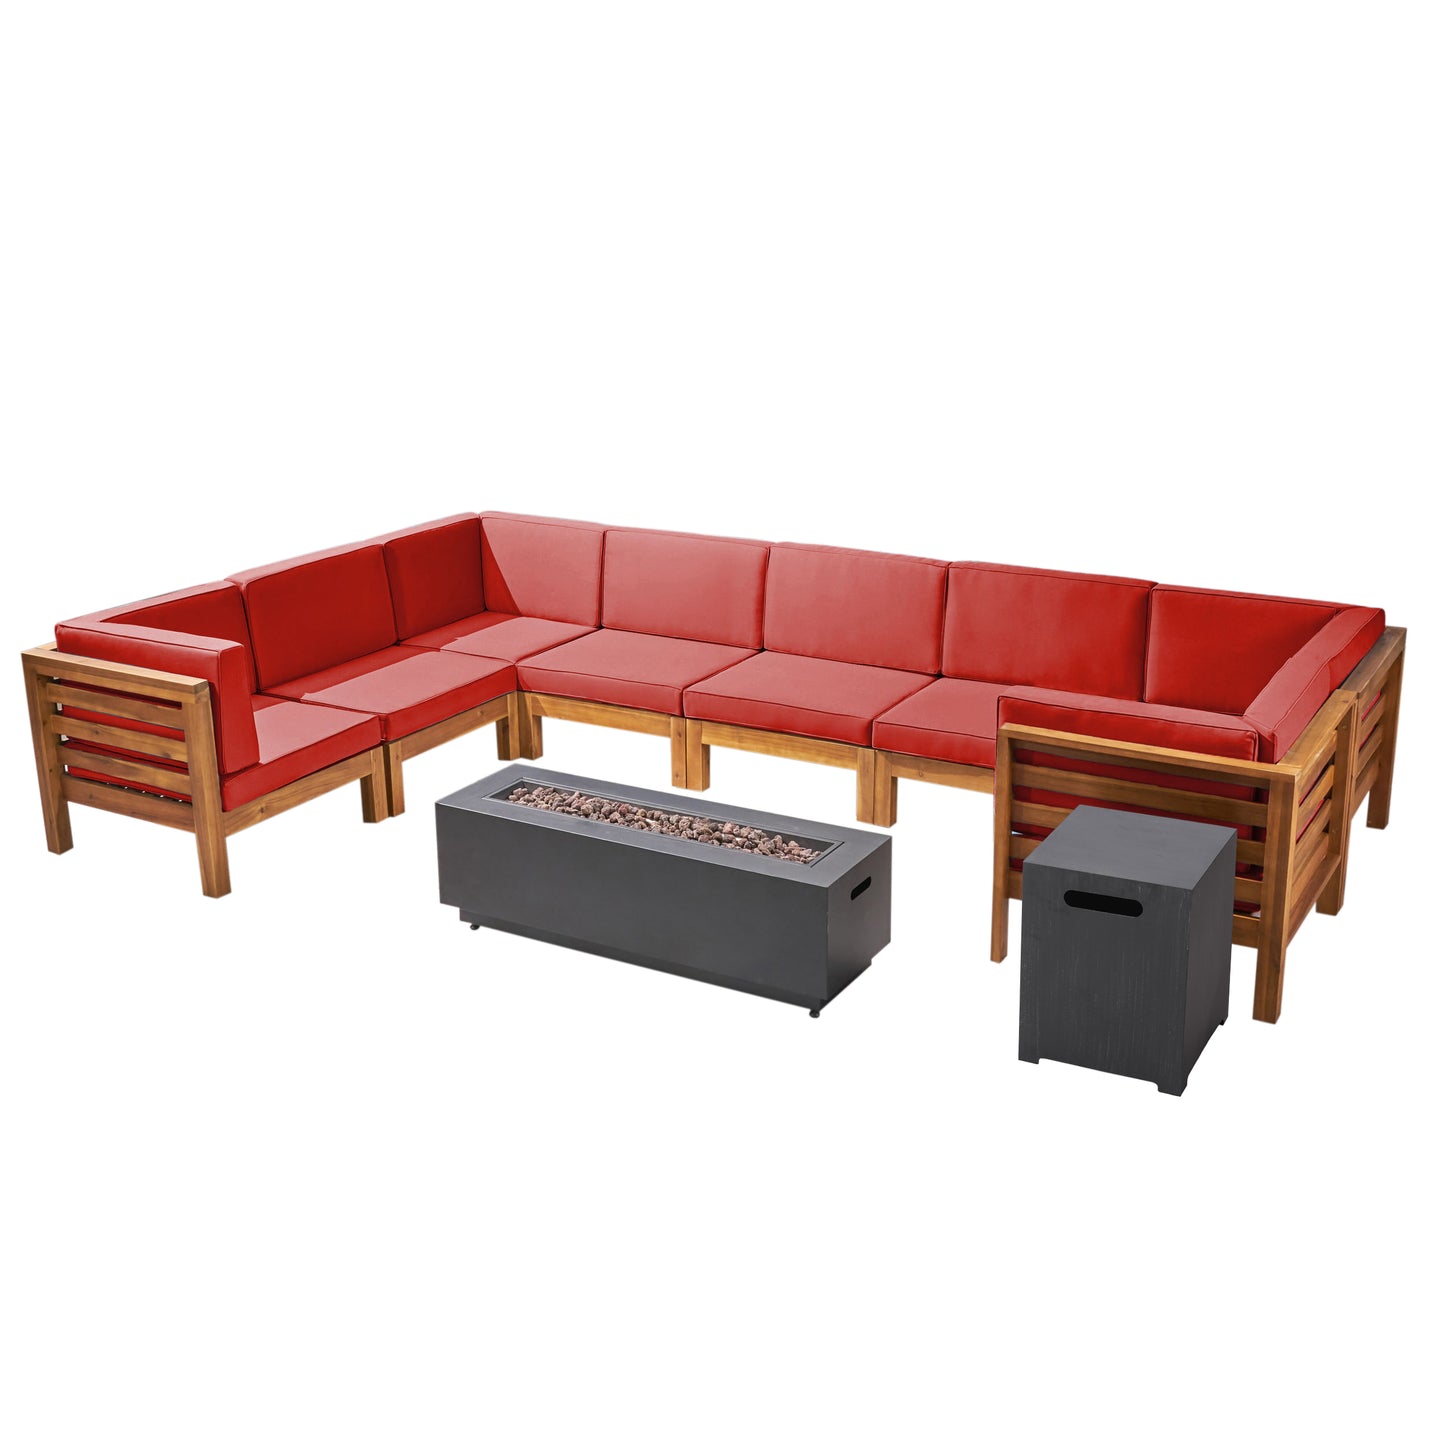 Krystin Outdoor U-Shaped Sectional Sofa Set with Fire Pit